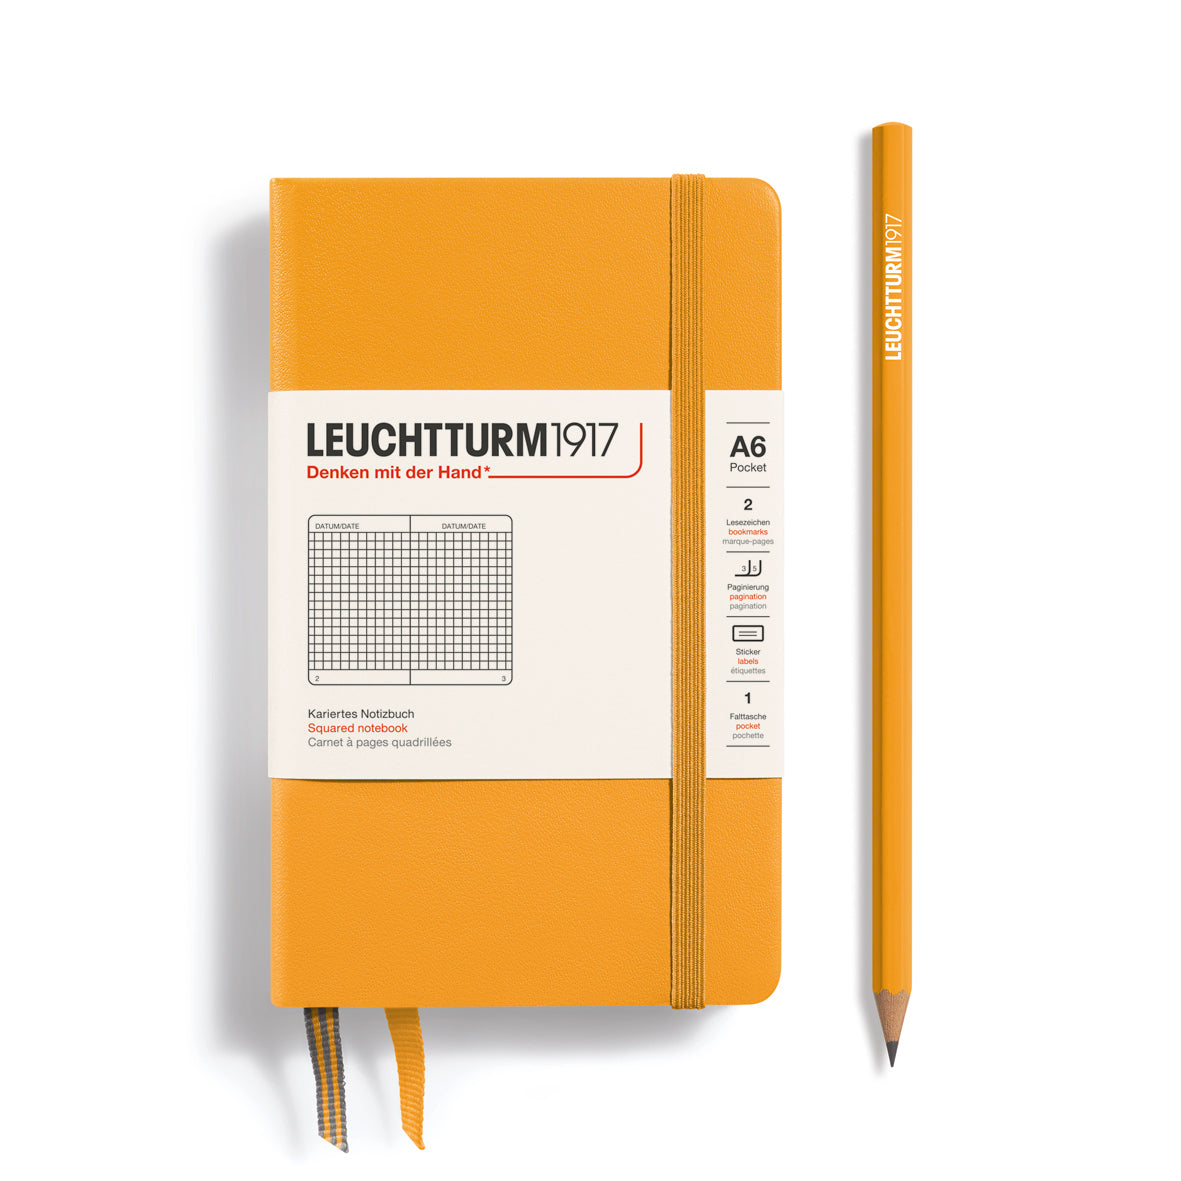 Leuchtturm1917 Notebook A6 Pocket Hardcover in rising sun orange and squared ruling from penny black